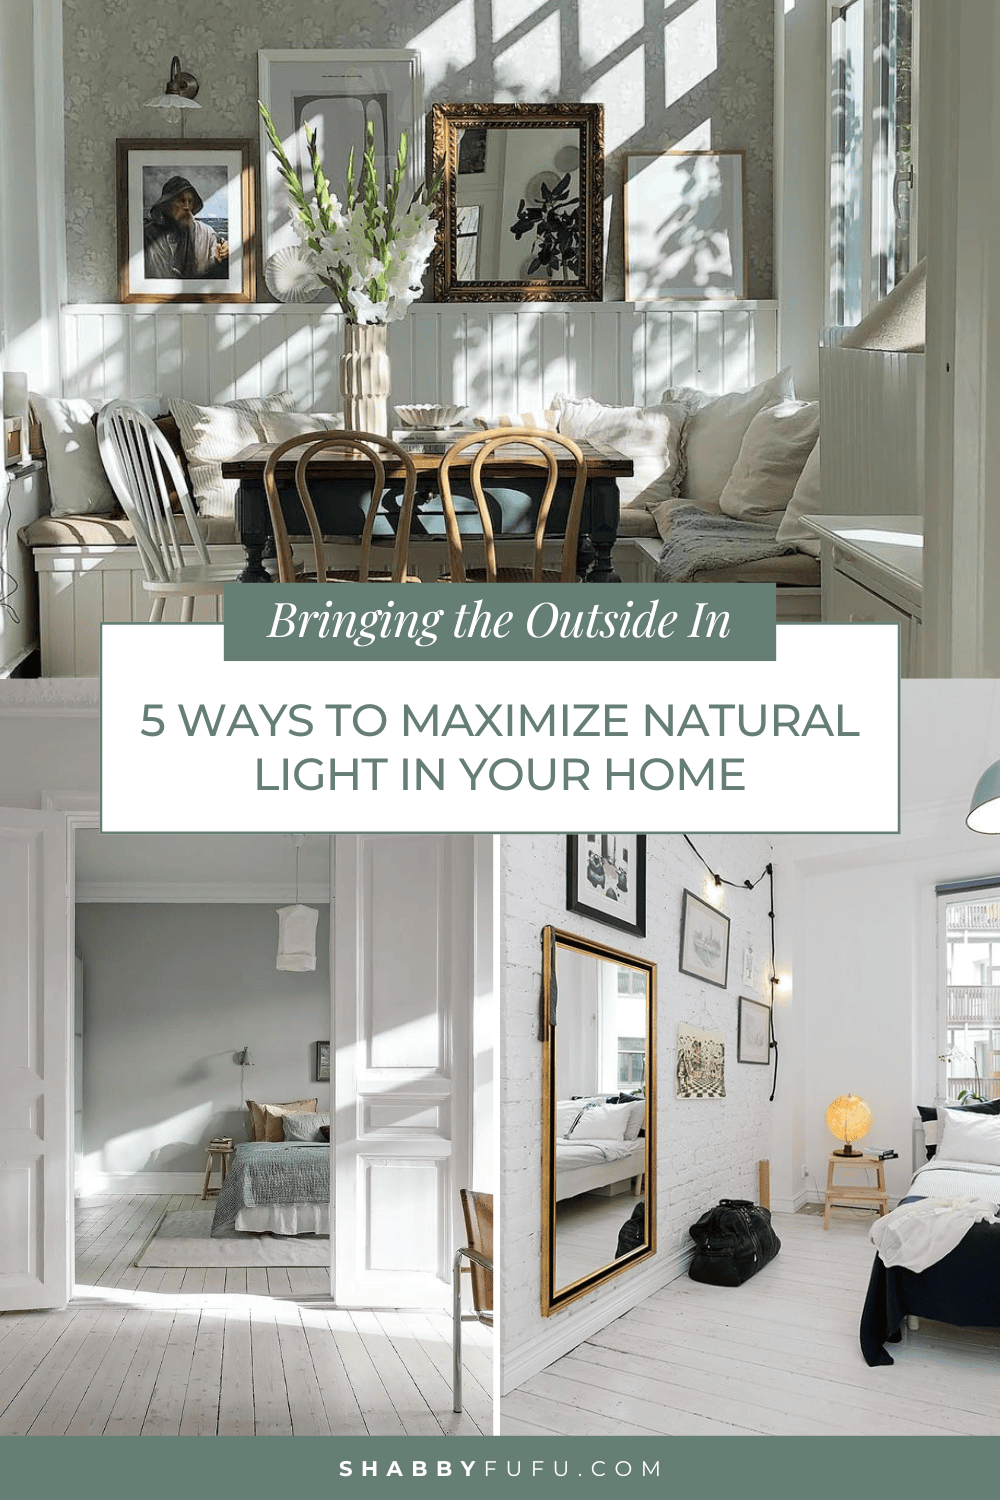 Decorative graphicc for Pinterest titled "Bringing the Outside In 5 Ways to Maximize Natural Light in Your Home"